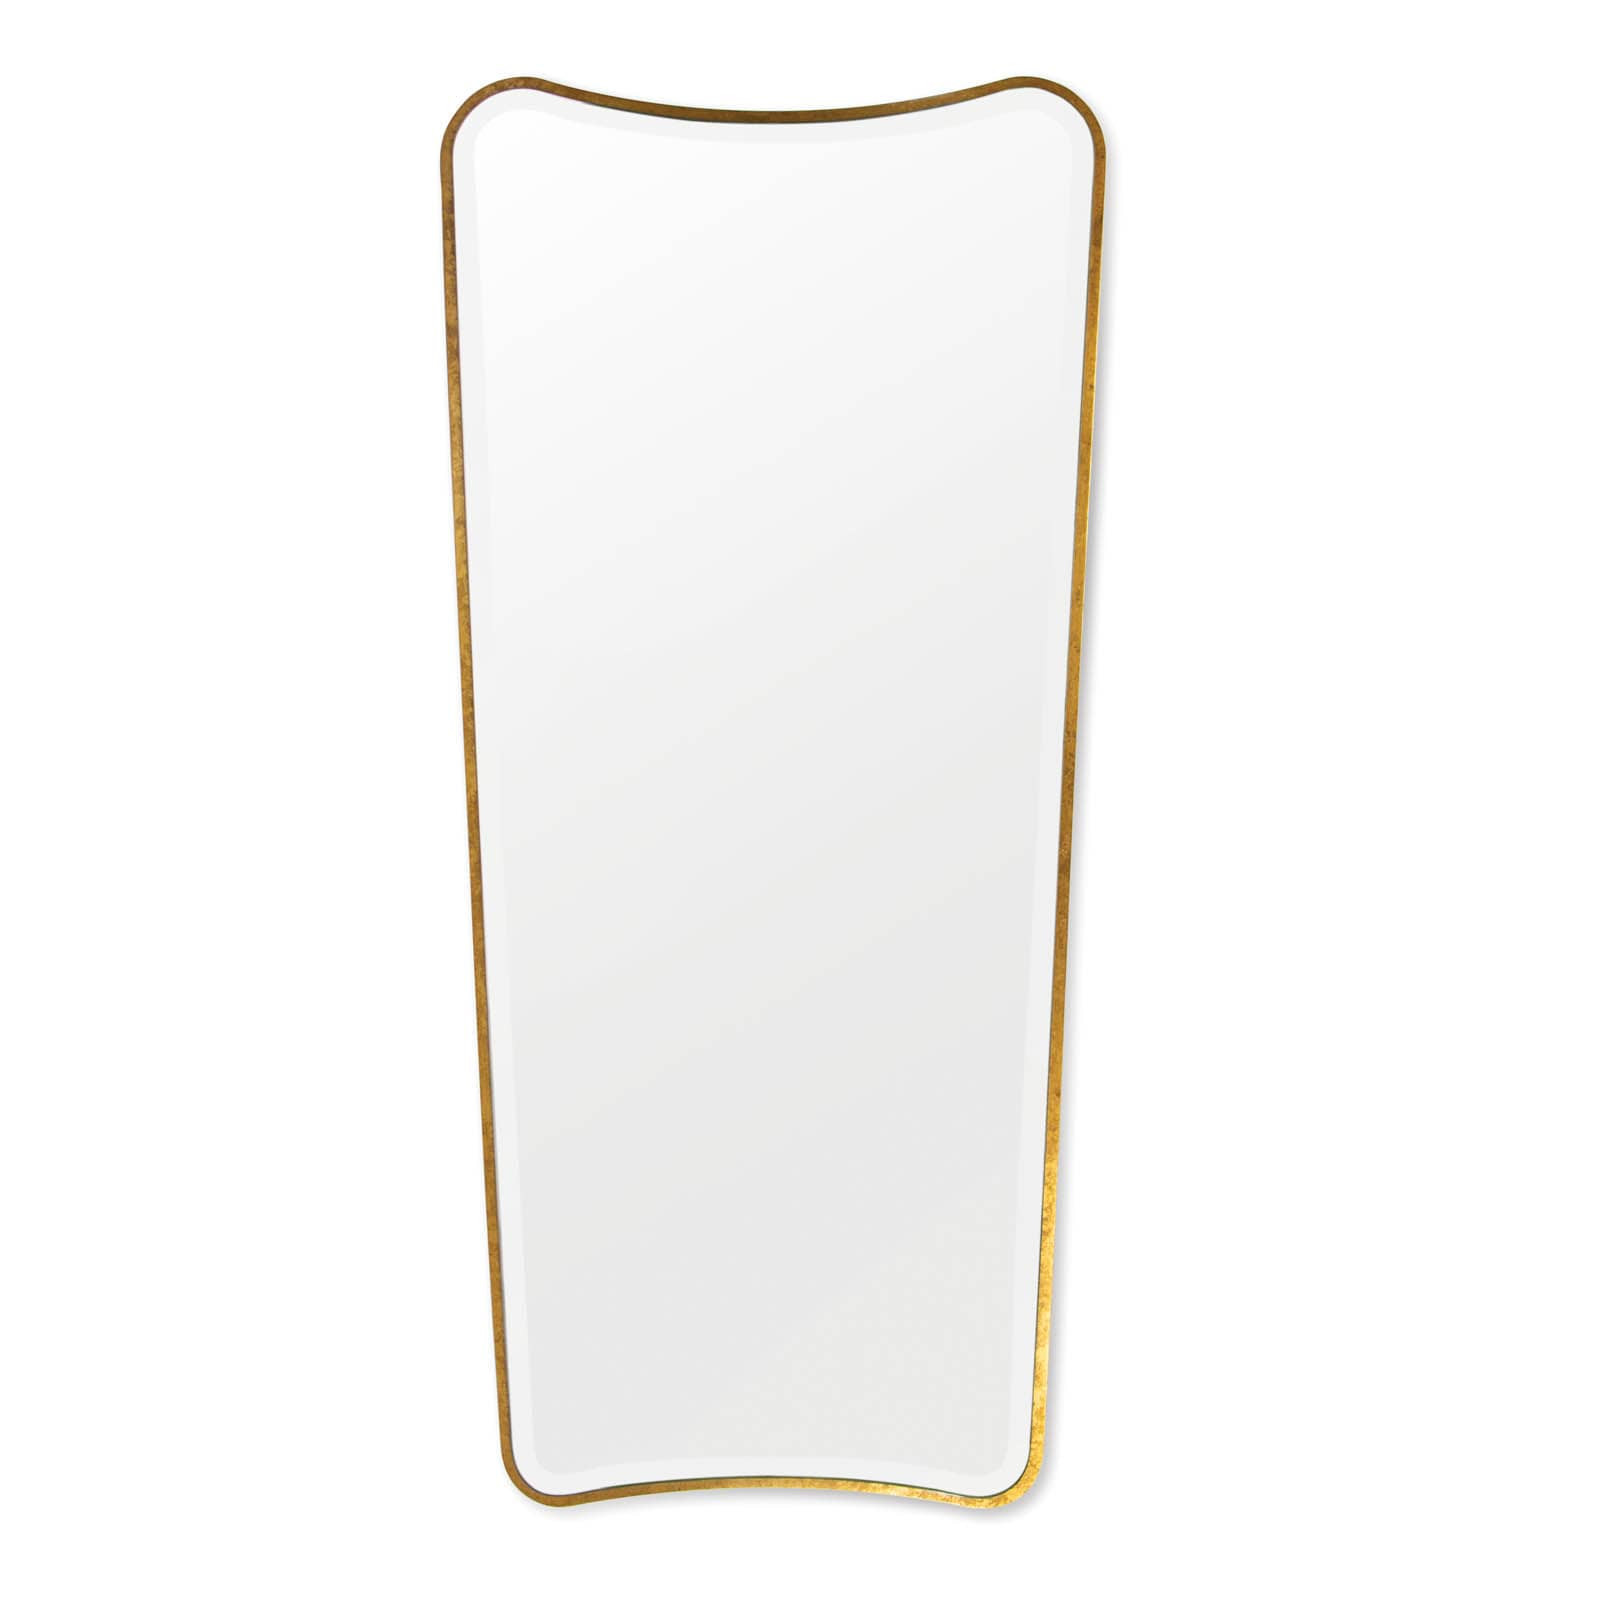 Art-Deco simply curved gold-plated wall mirror